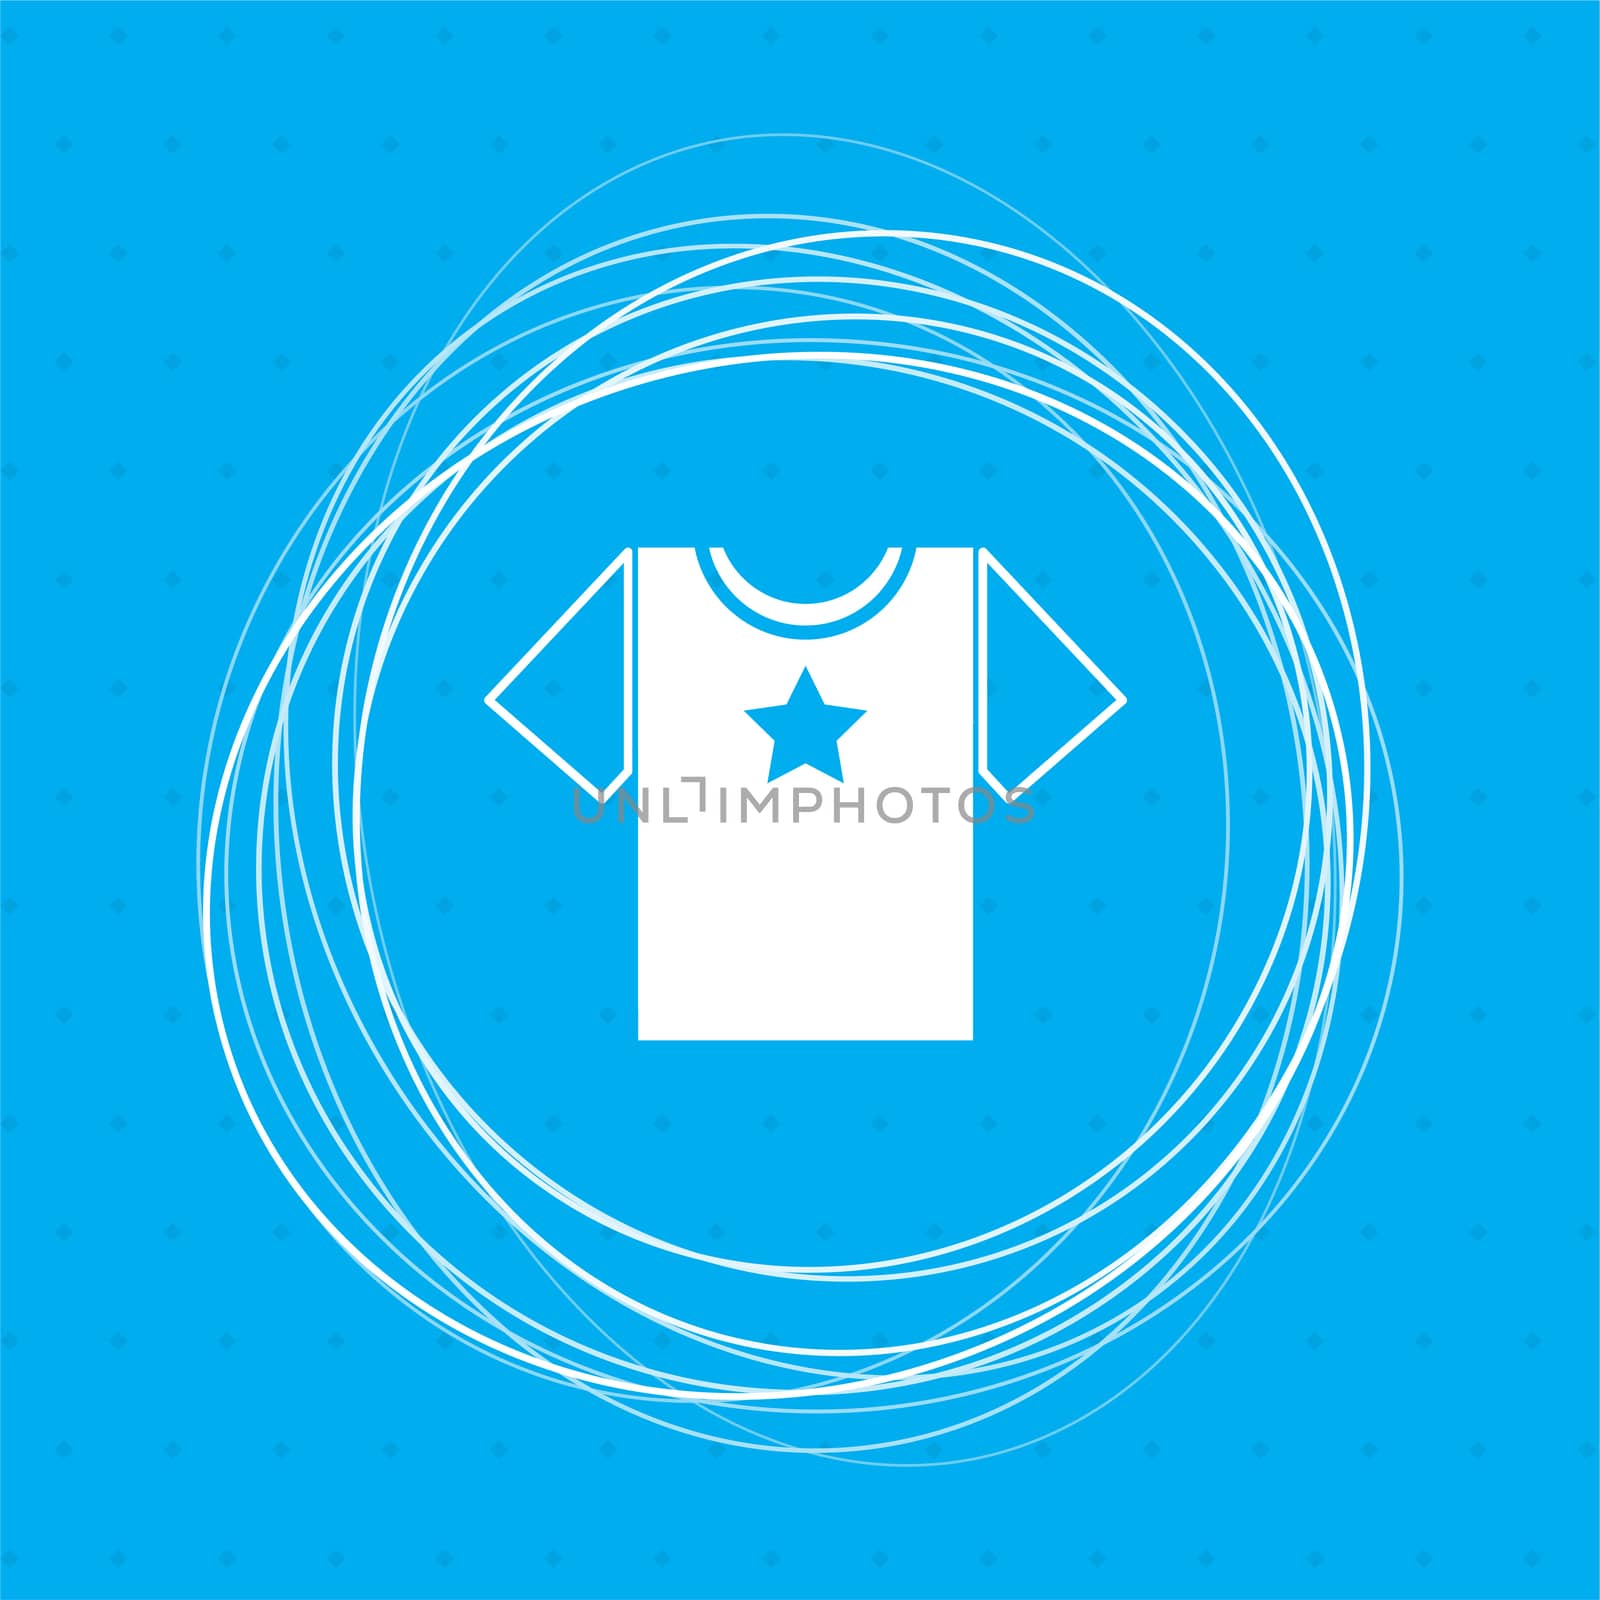 t-shirt icon on a blue background with abstract circles around and place for your text. illustration